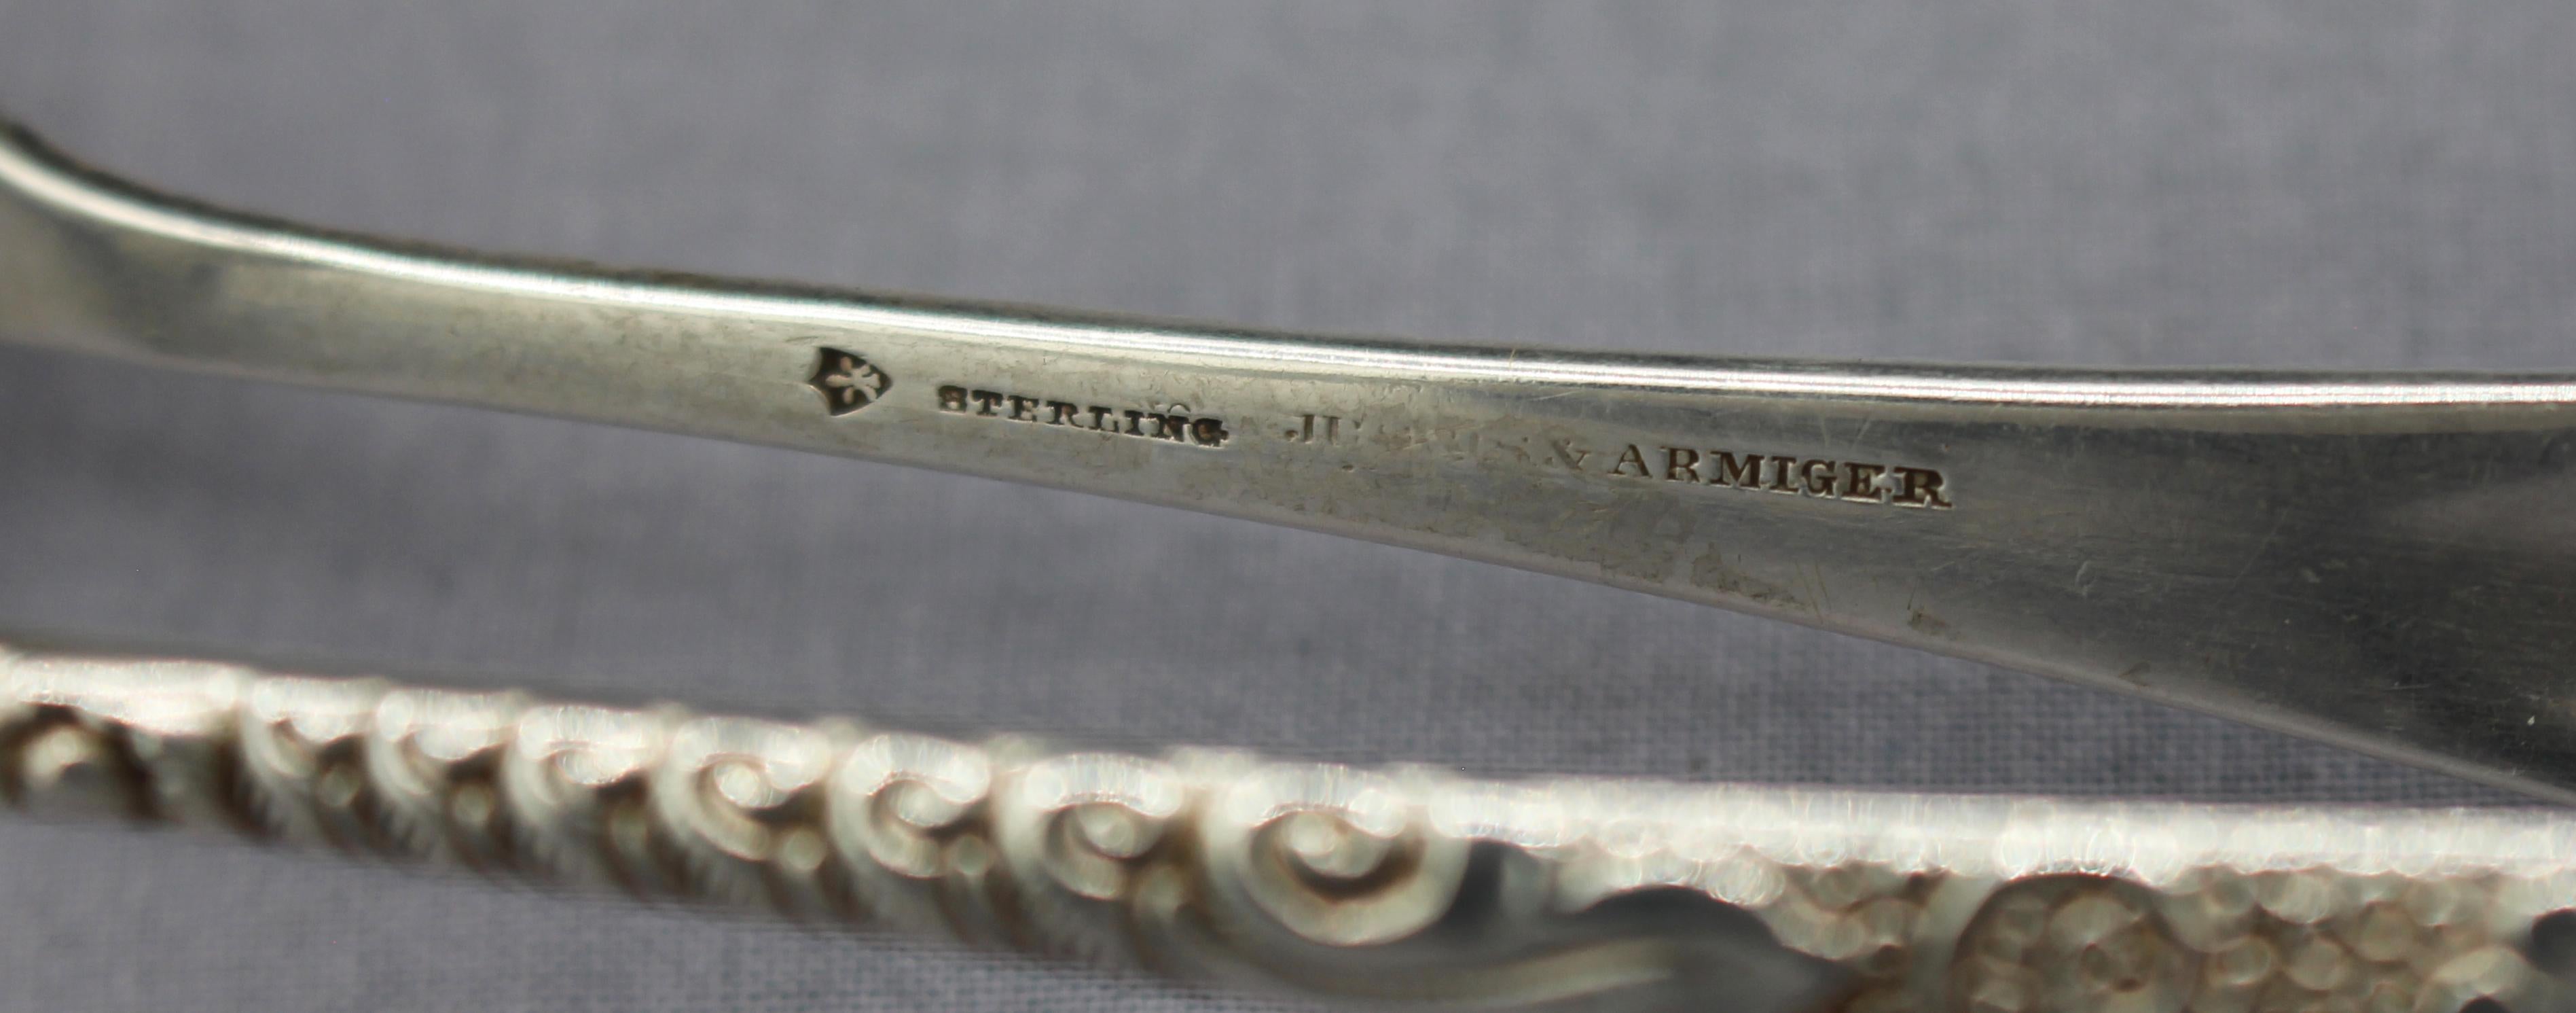 American c. 1870s-80s Sterling Silver Ice Tongs